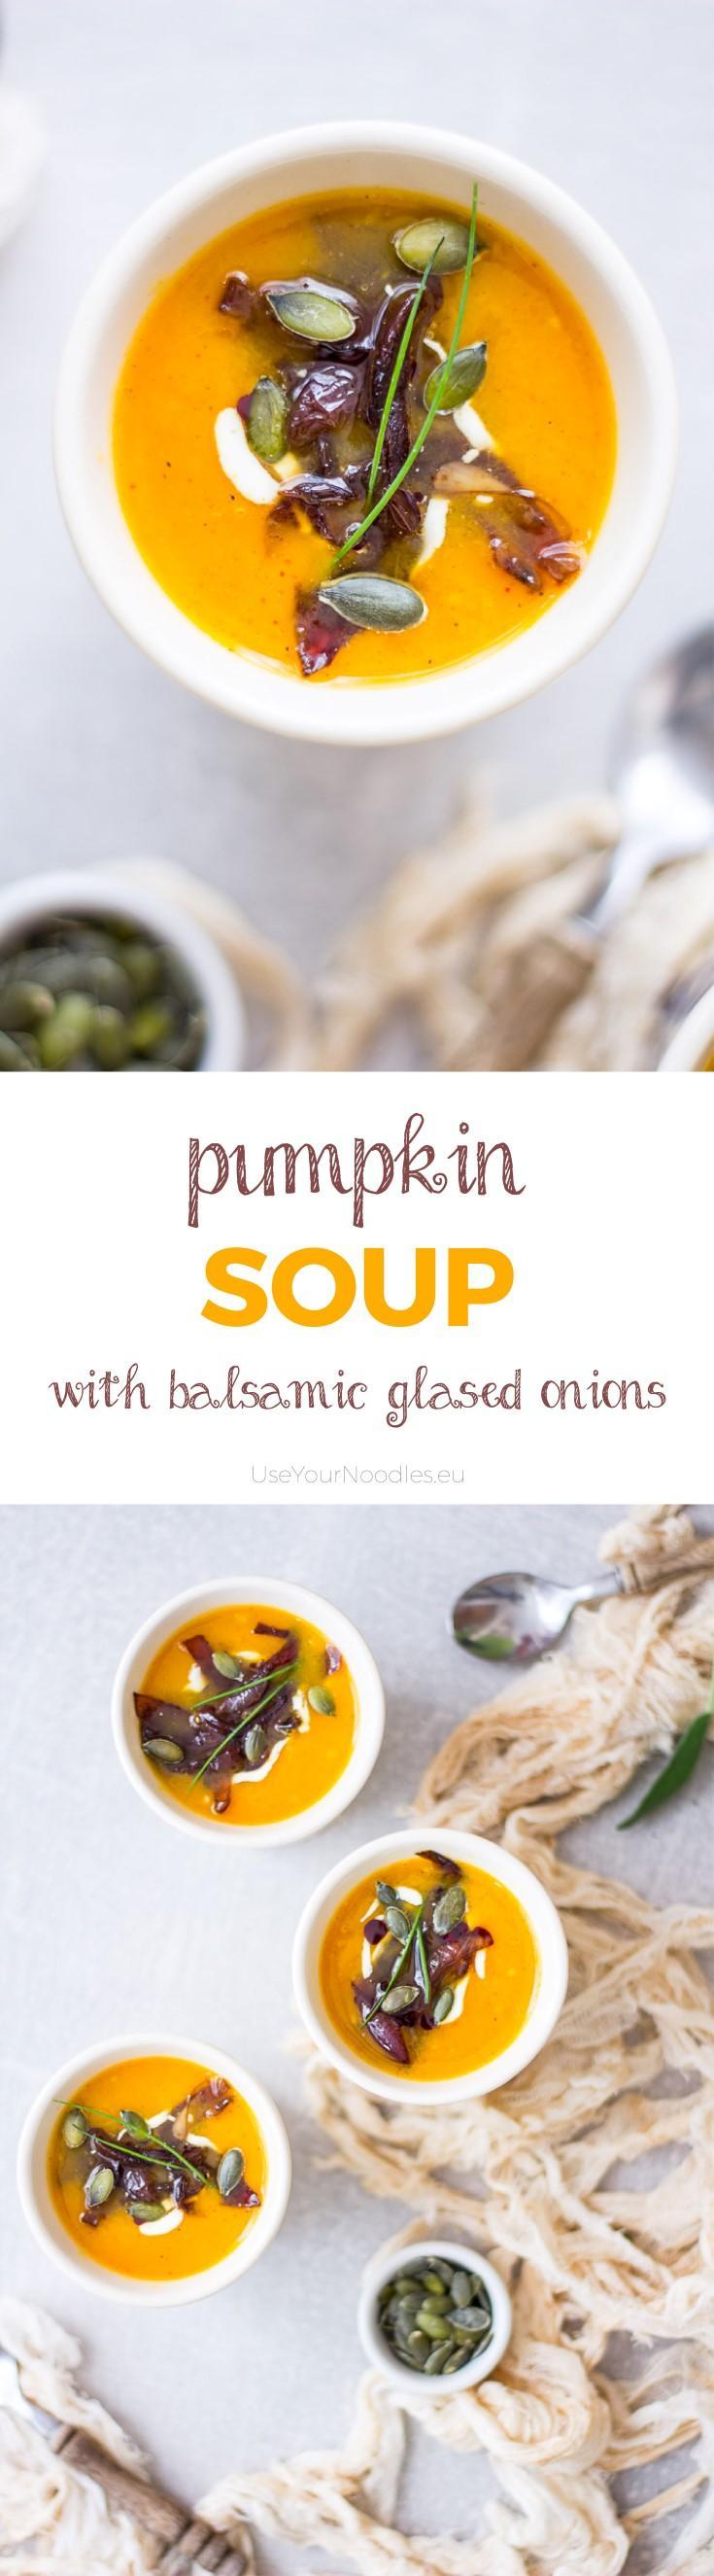 Warm, sweet and spicy pumpkin soup with balsamic glased onions will be your new favorite autumn comfort food! Click to find the whole recipe or pin and save for later!